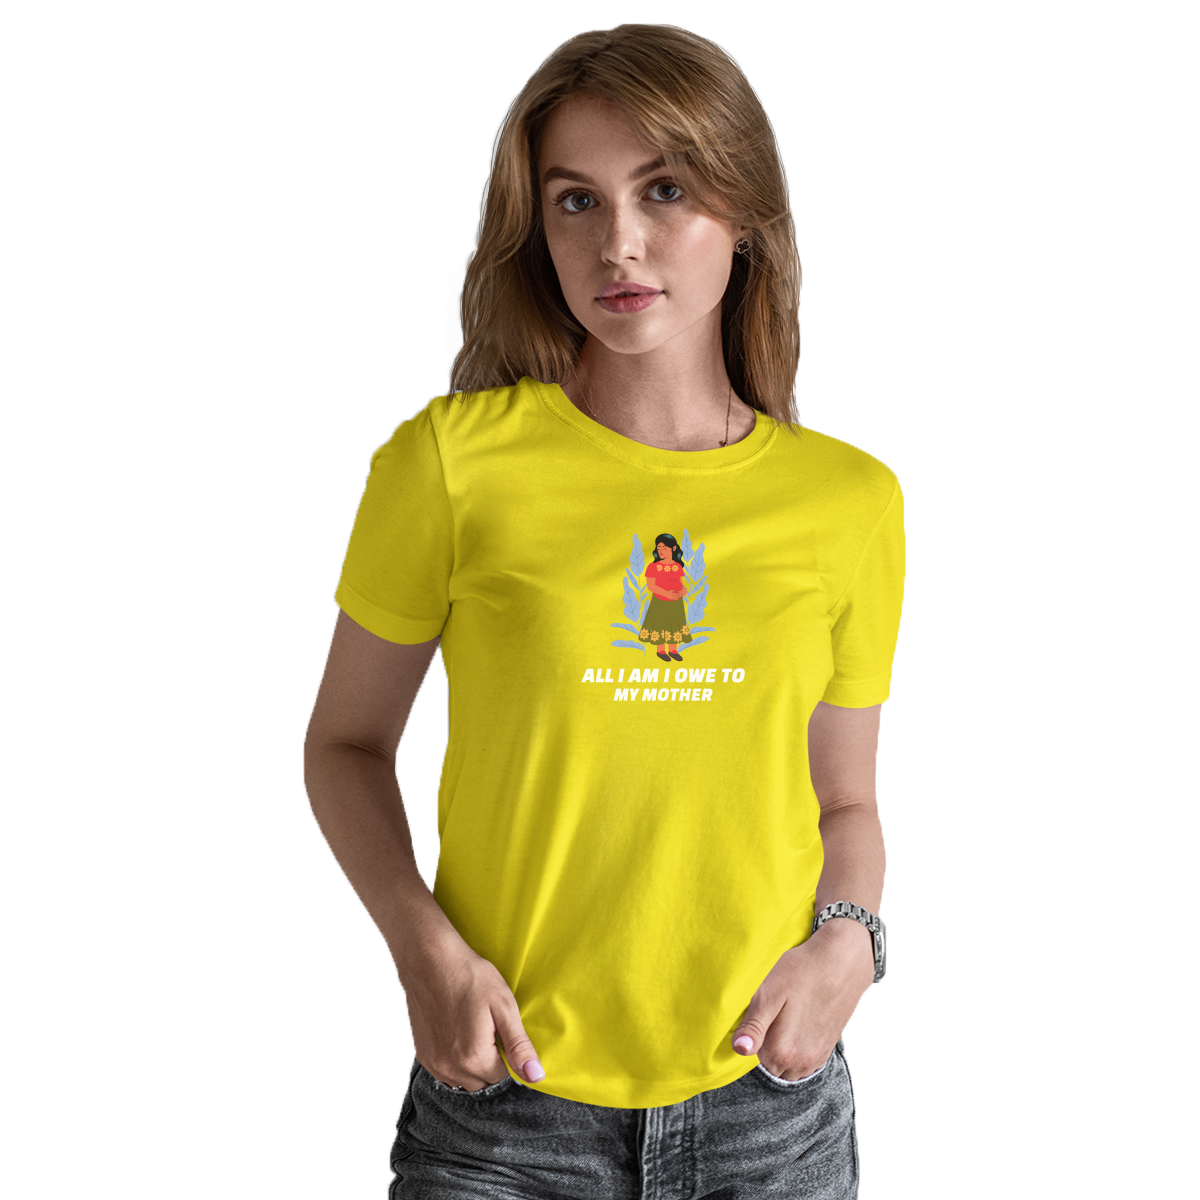 I Owe To My Mother Women's T-shirt | Yellow